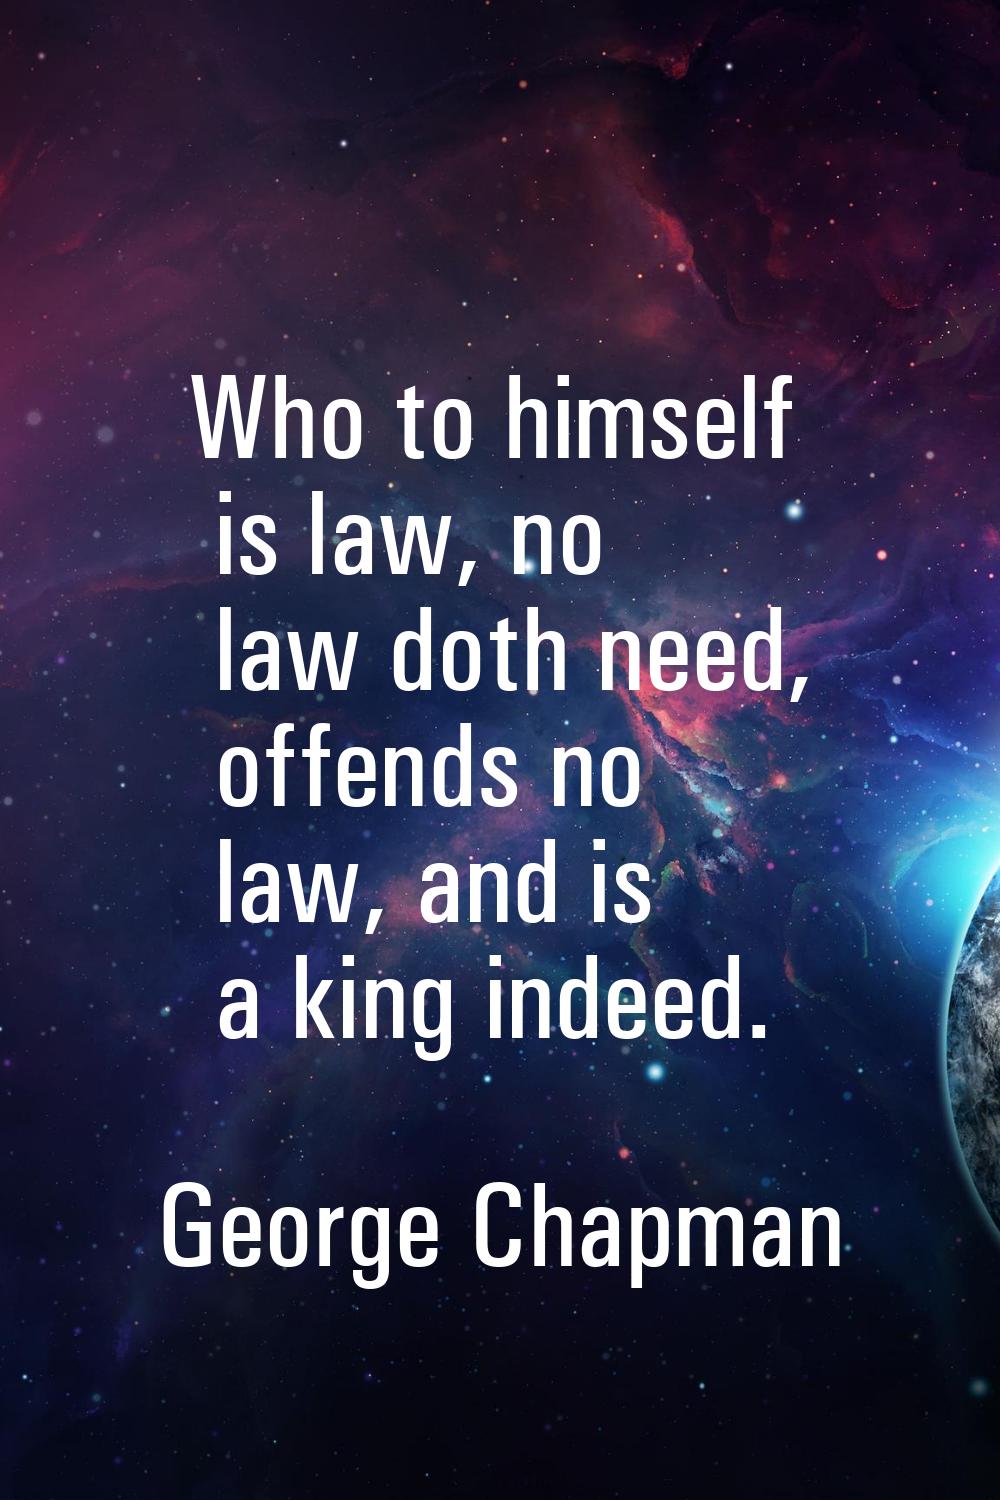 Who to himself is law, no law doth need, offends no law, and is a king indeed.